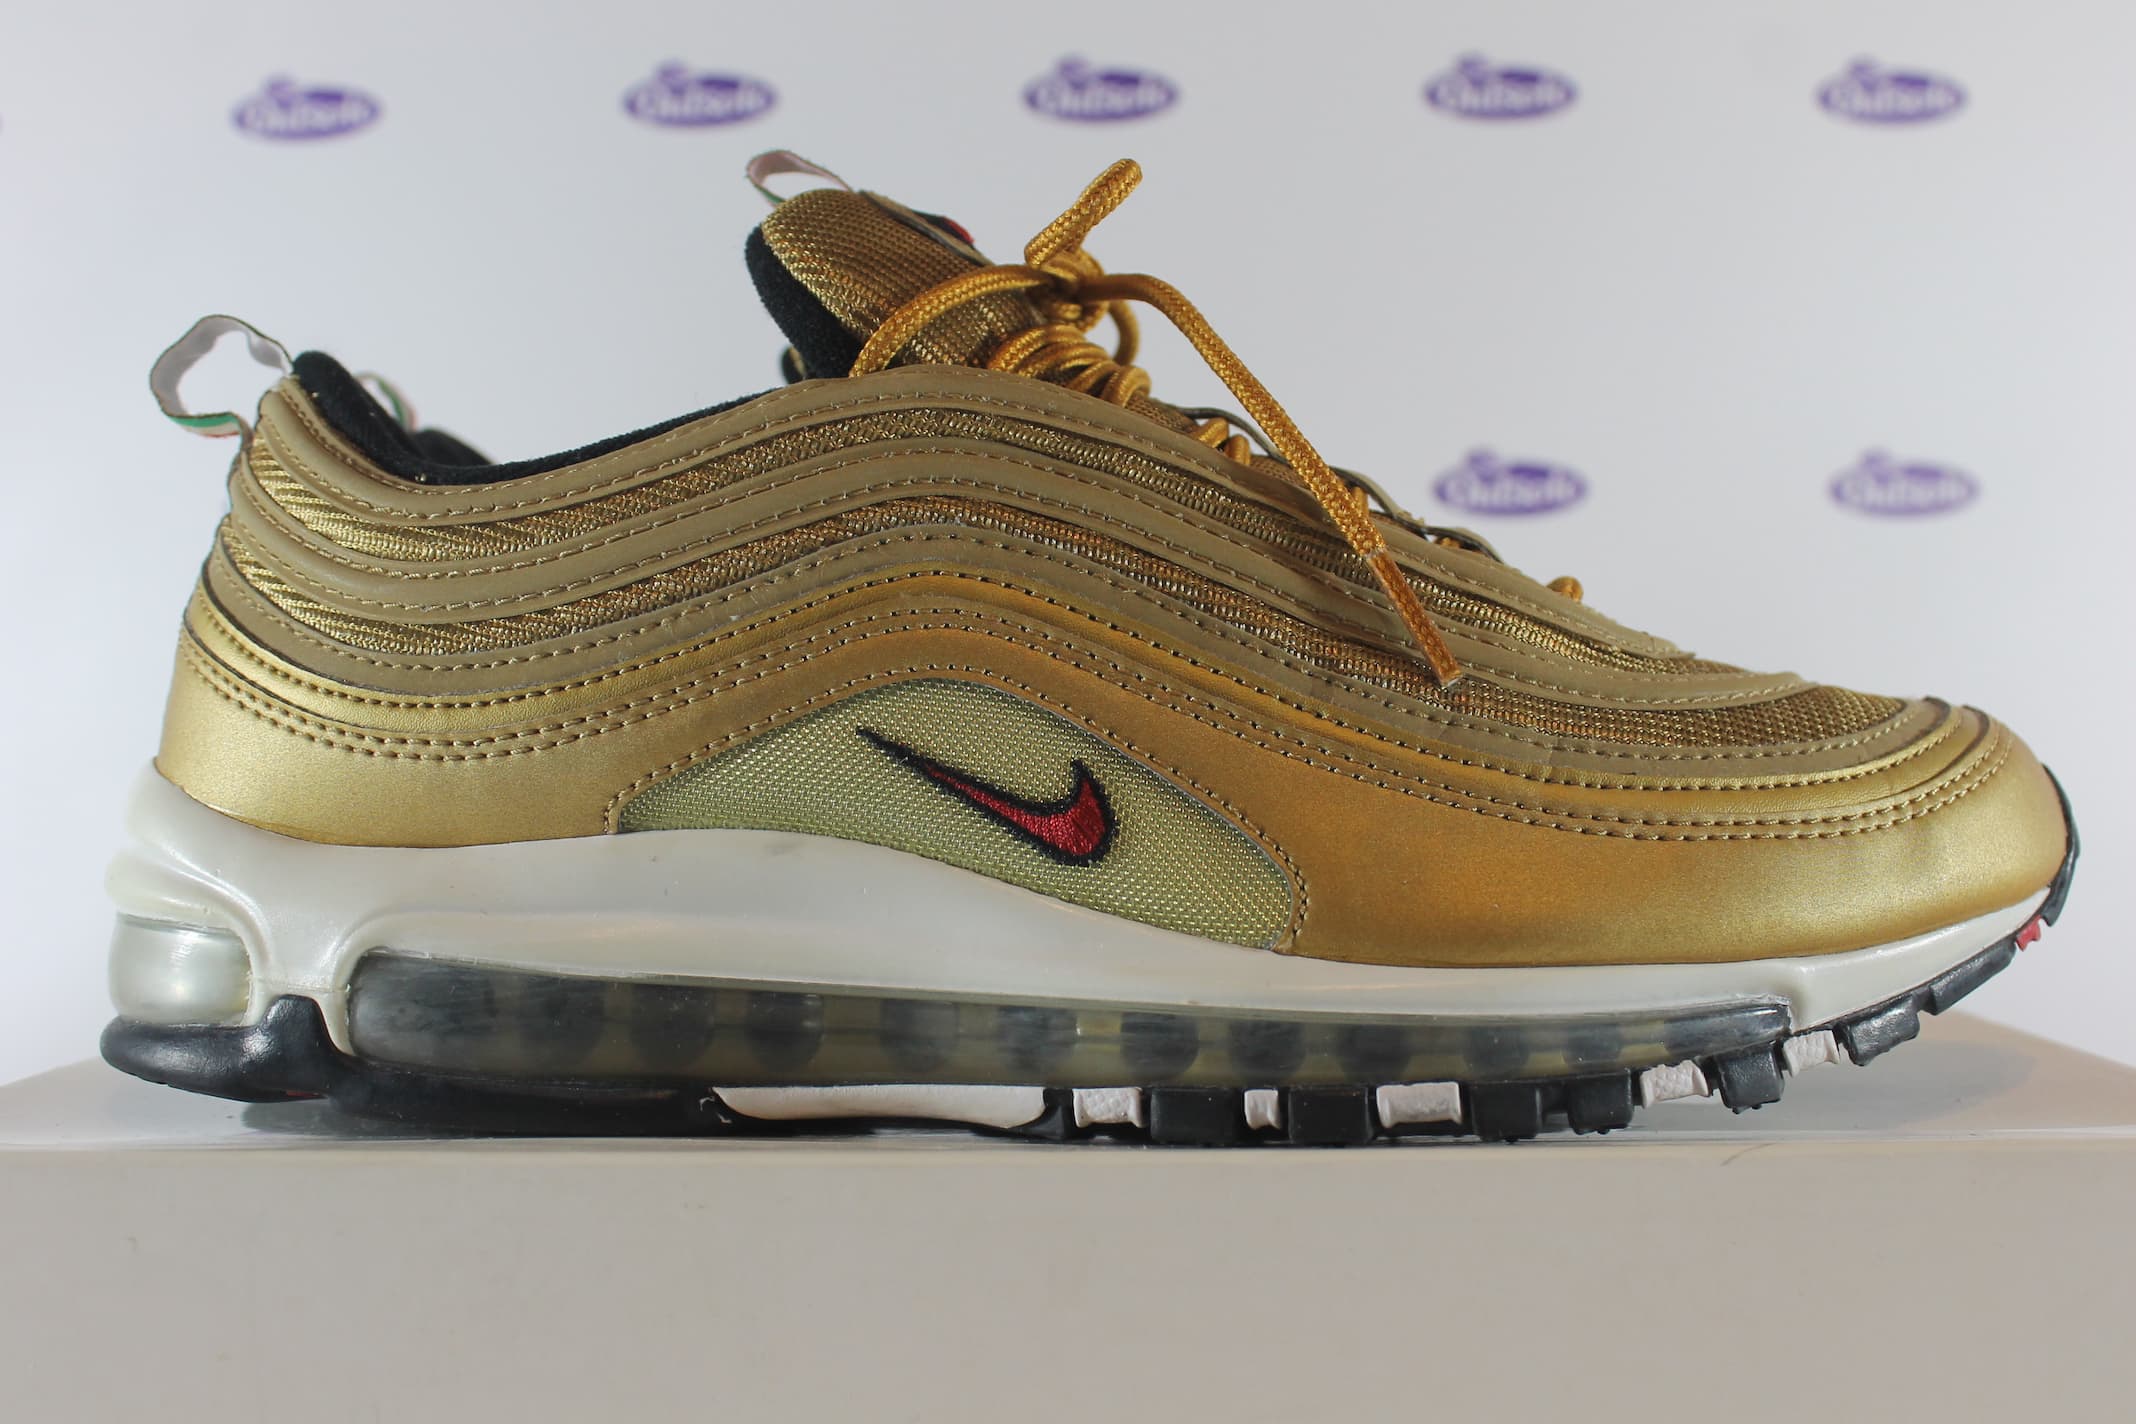 fairy informal set a fire Nike Air Max 97 Metallic Gold Italy • ✓ In stock at Outsole